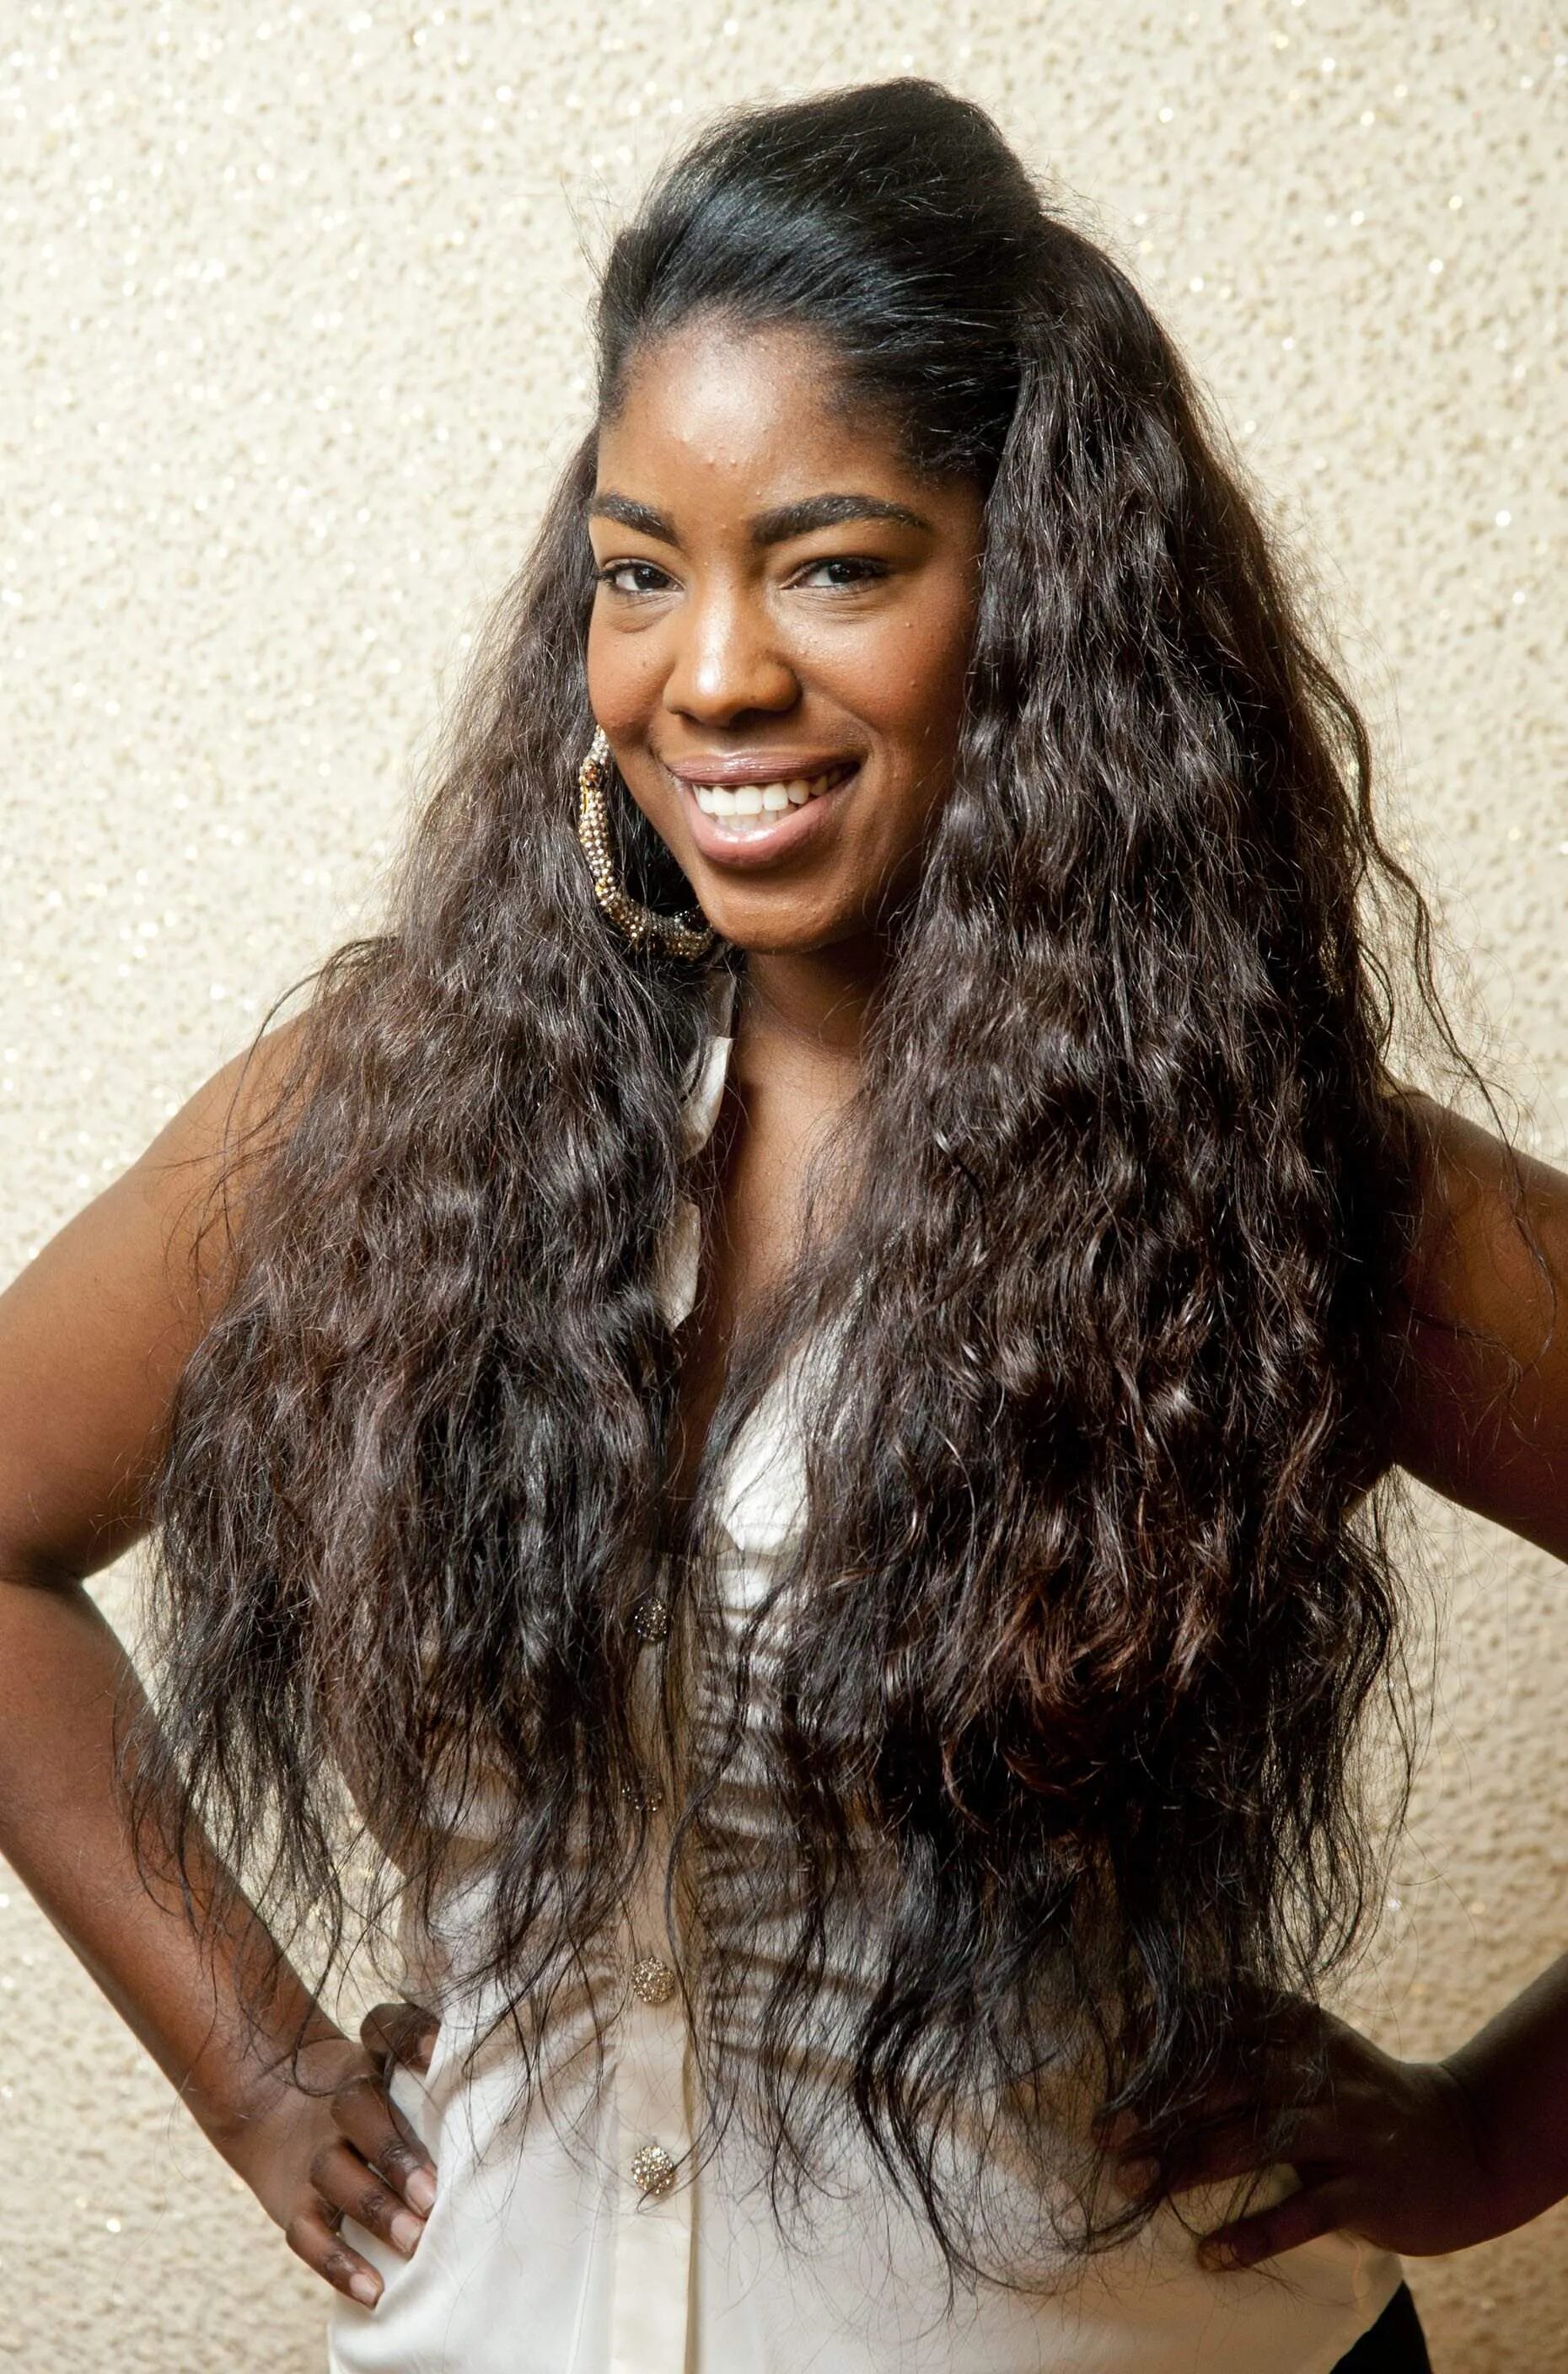 Black women shifting to curly hair weaves